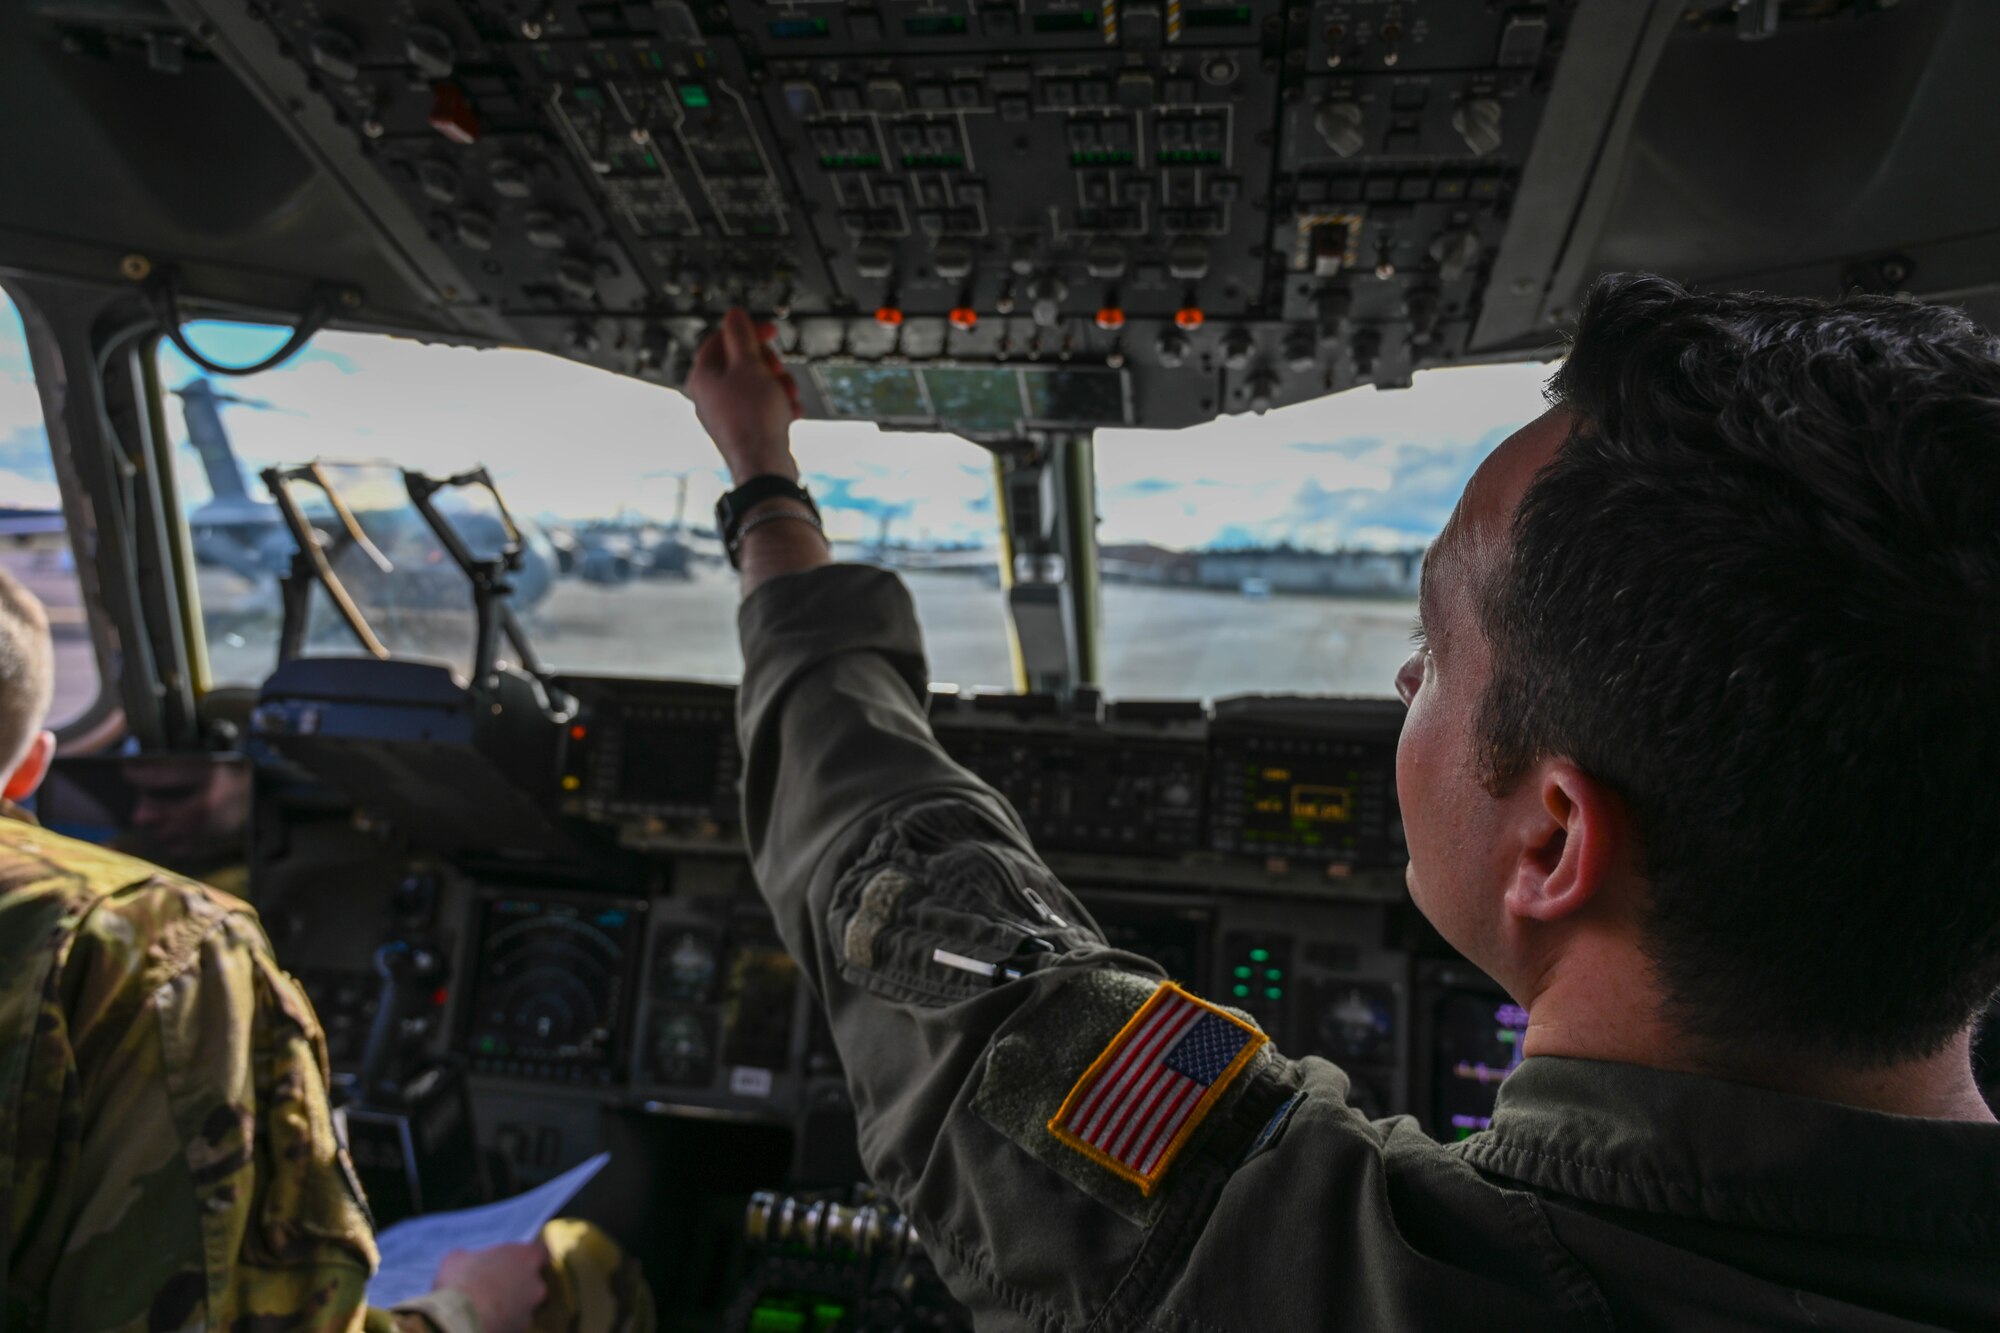 U.S. Air Force Capt. Andrew Butler, 58th Airlift Squadron (AS) instructor pilot, goes through his preflight checklist before a large formation exercise (LFE) at Joint Base Lewis-McChord, Washington, Feb. 22, 2024. During the LFE, the aircrew from the 58th AS completed multiple airdrop and low level formations. (U.S. Air Force photo by Senior Airman Trenton Jancze)